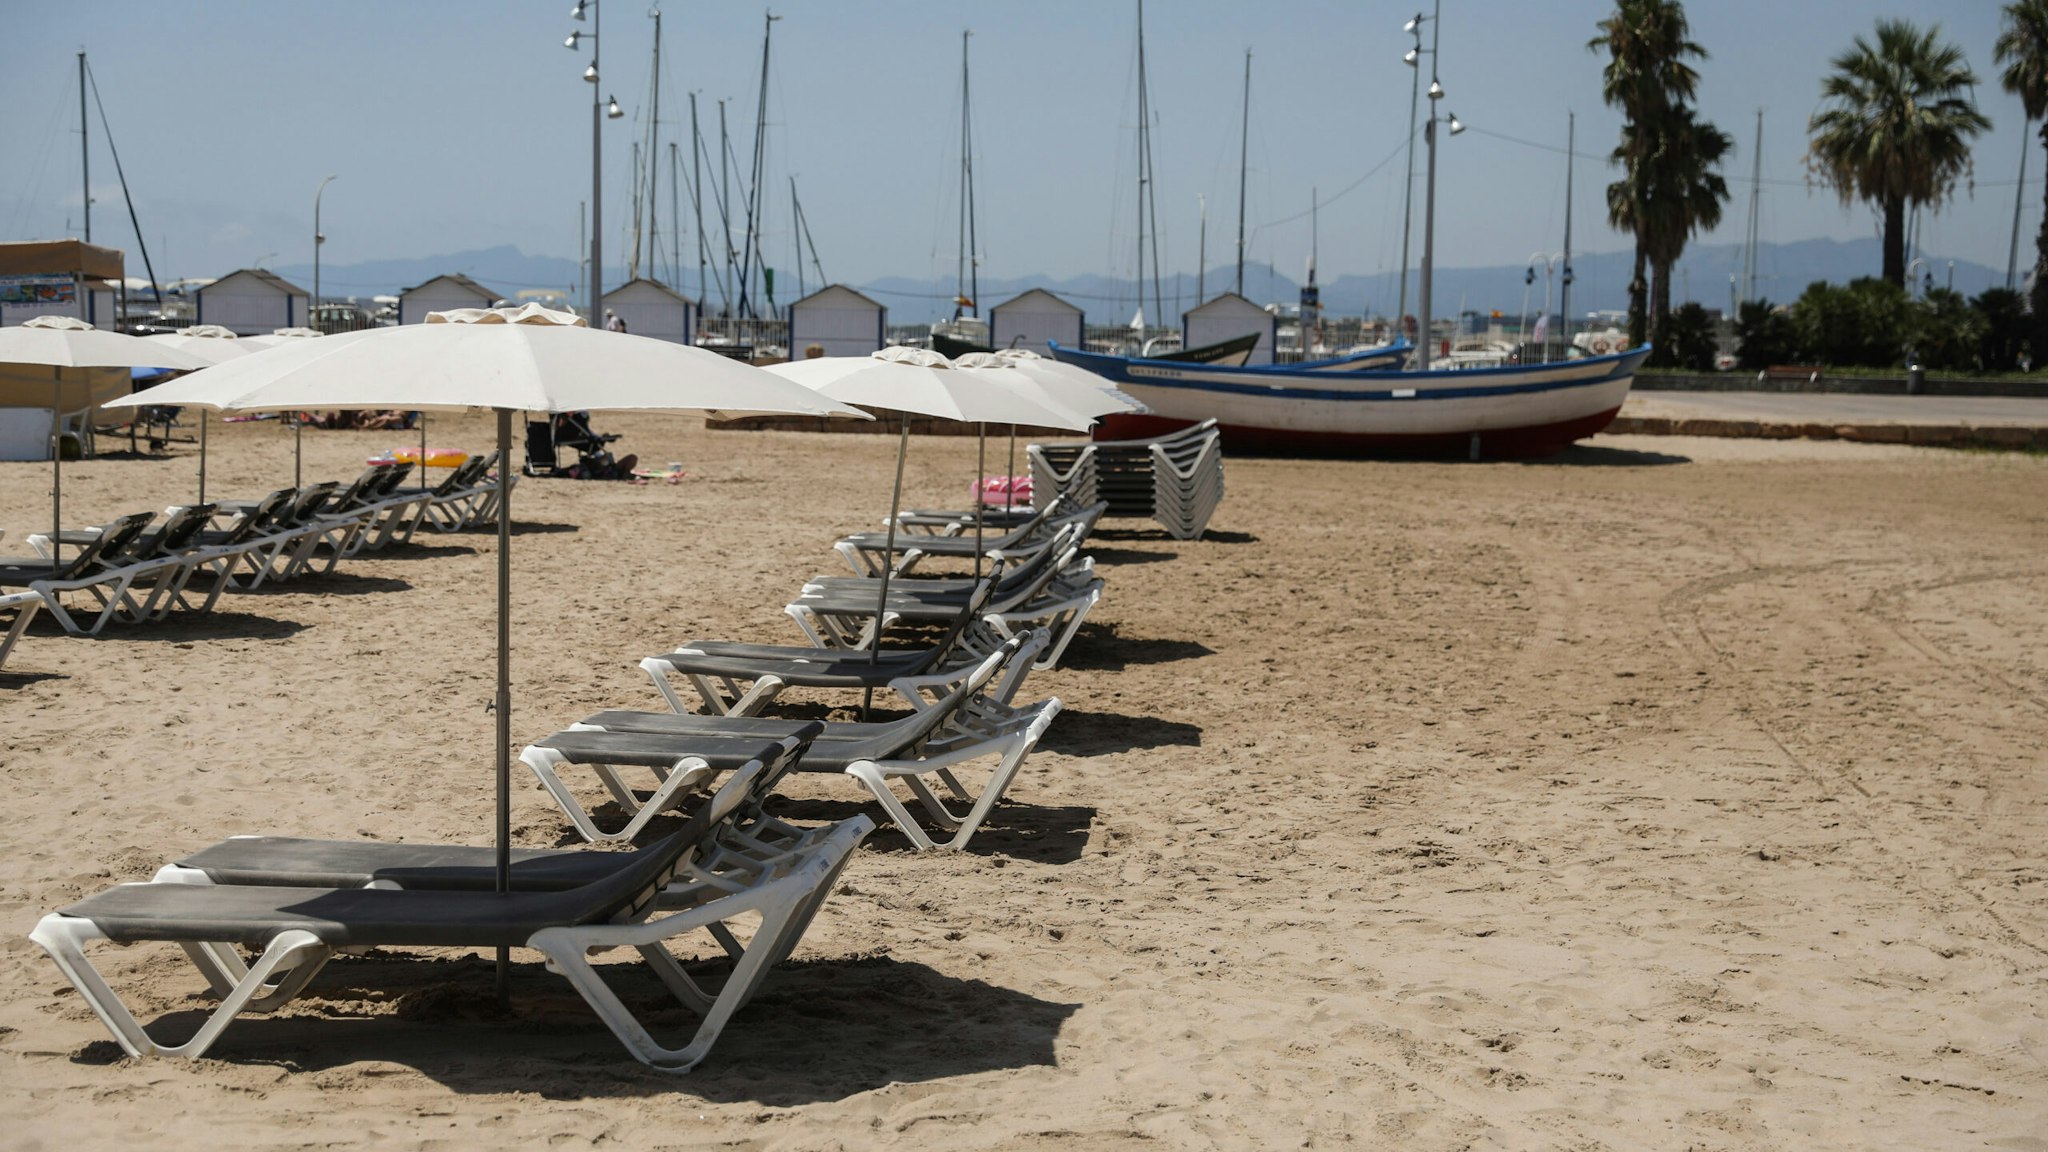 Empty sun loungers sit on the sand at the beach in Salou, Spain, on Monday, July 27, 2020. Spain's tourism industry is at increasing risk of being shut down as countries across Europe seek to restrict visits to the Mediterranean nation, following an order by the British government to quarantine visitors. Photographer: Angel Garcia/Bloomberg via Getty Images